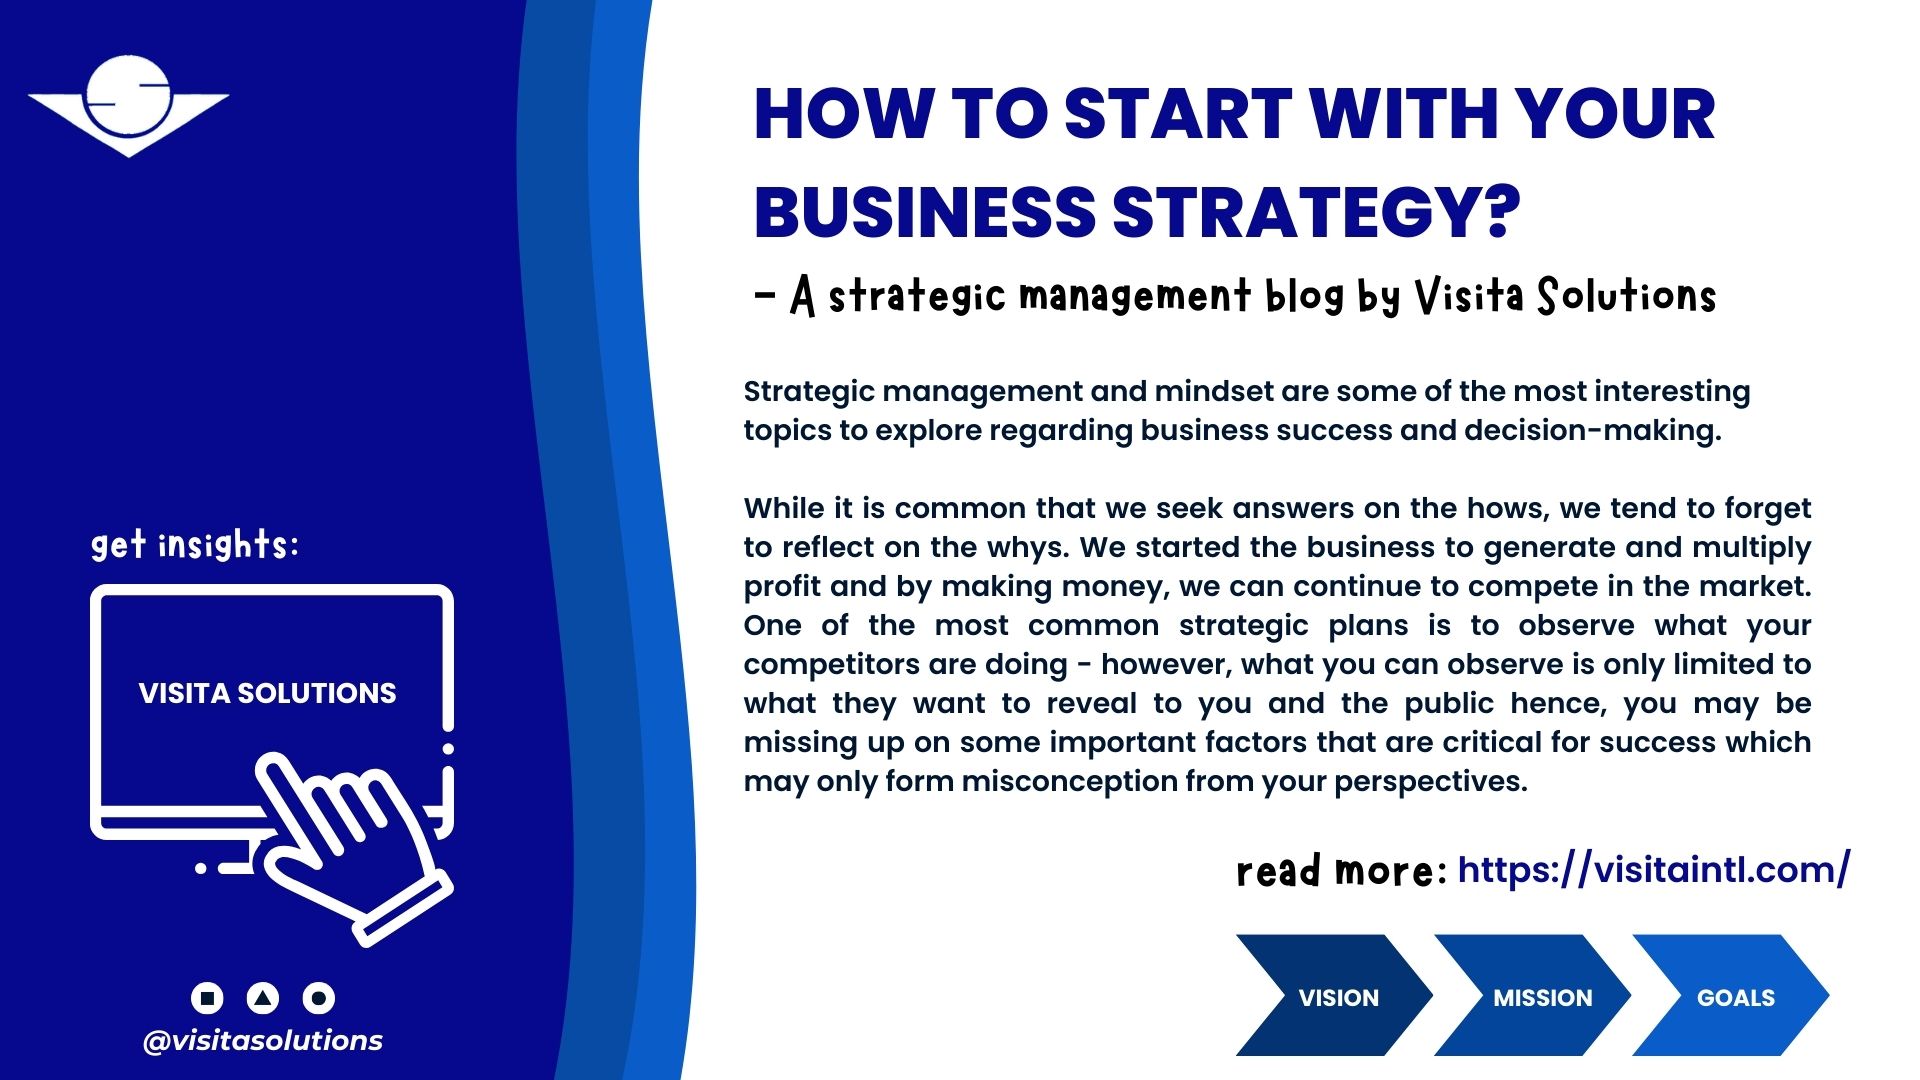 How to start with your business strategy? – A strategic management blog by Visita Solutions